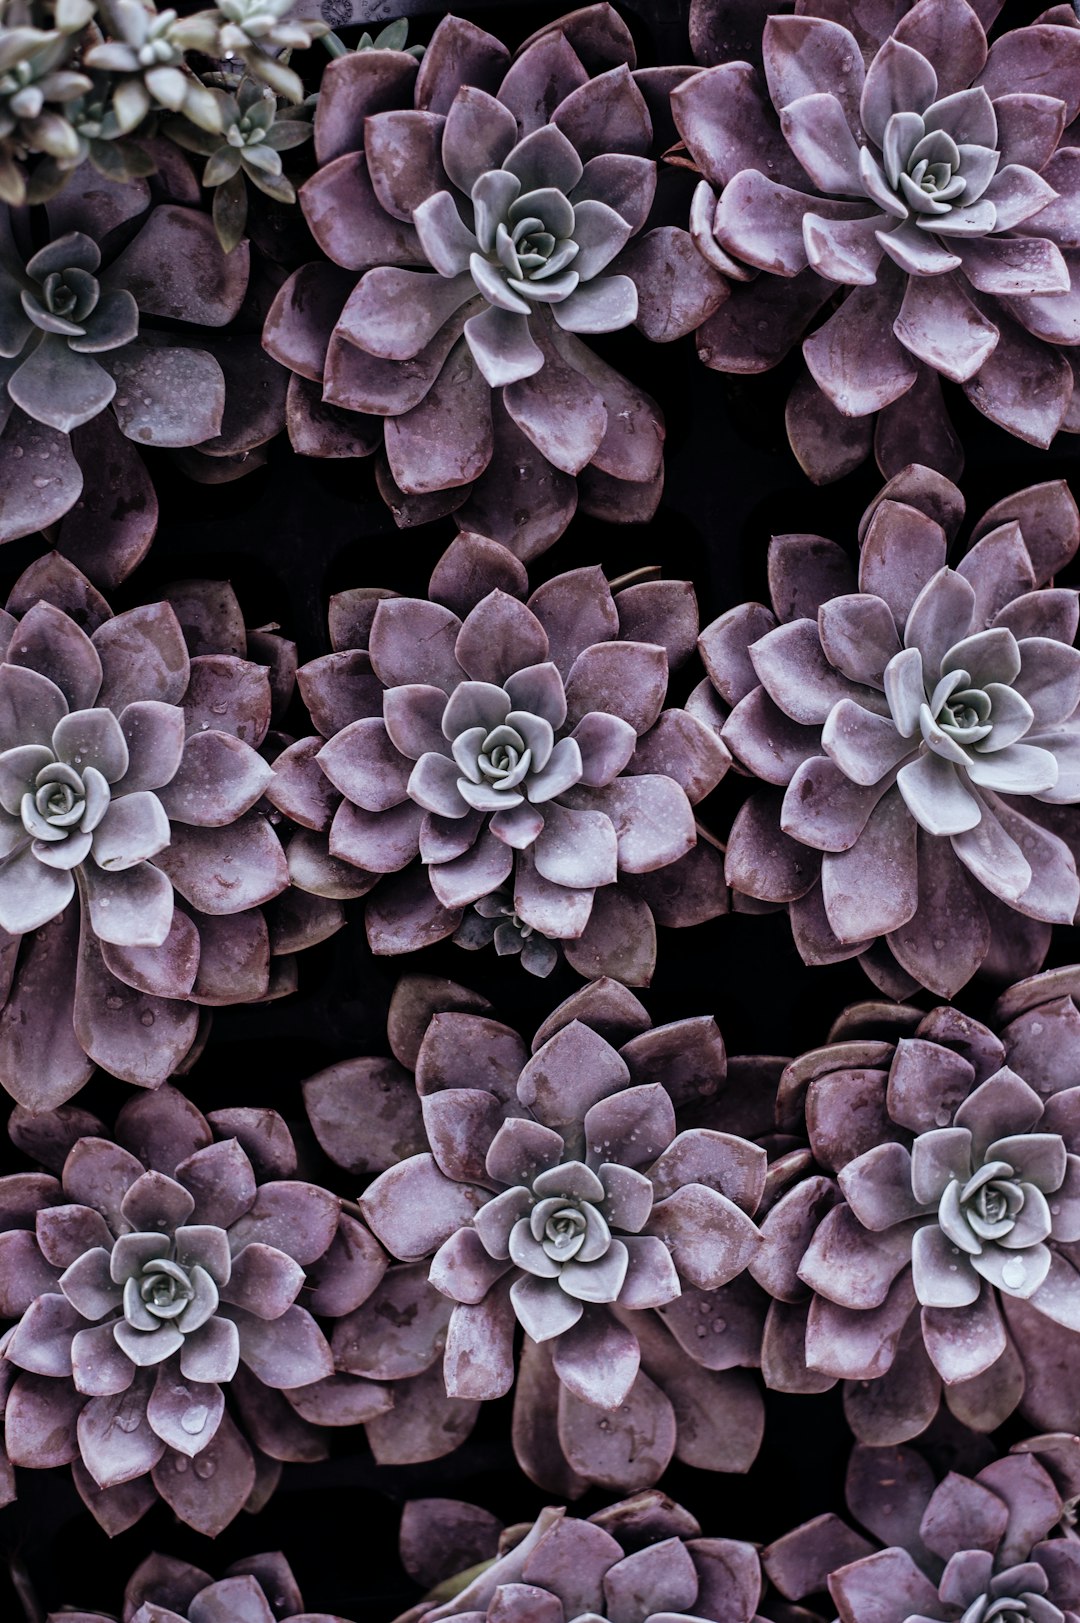 A top down photograph of dark purple succulents, capturing the intricate patterns and textures on each flower. The image is shot with Canon EOS R5 mirrorless camera using an RF 80mm F2 lens for sharp focus and natural colour tones. –ar 85:128